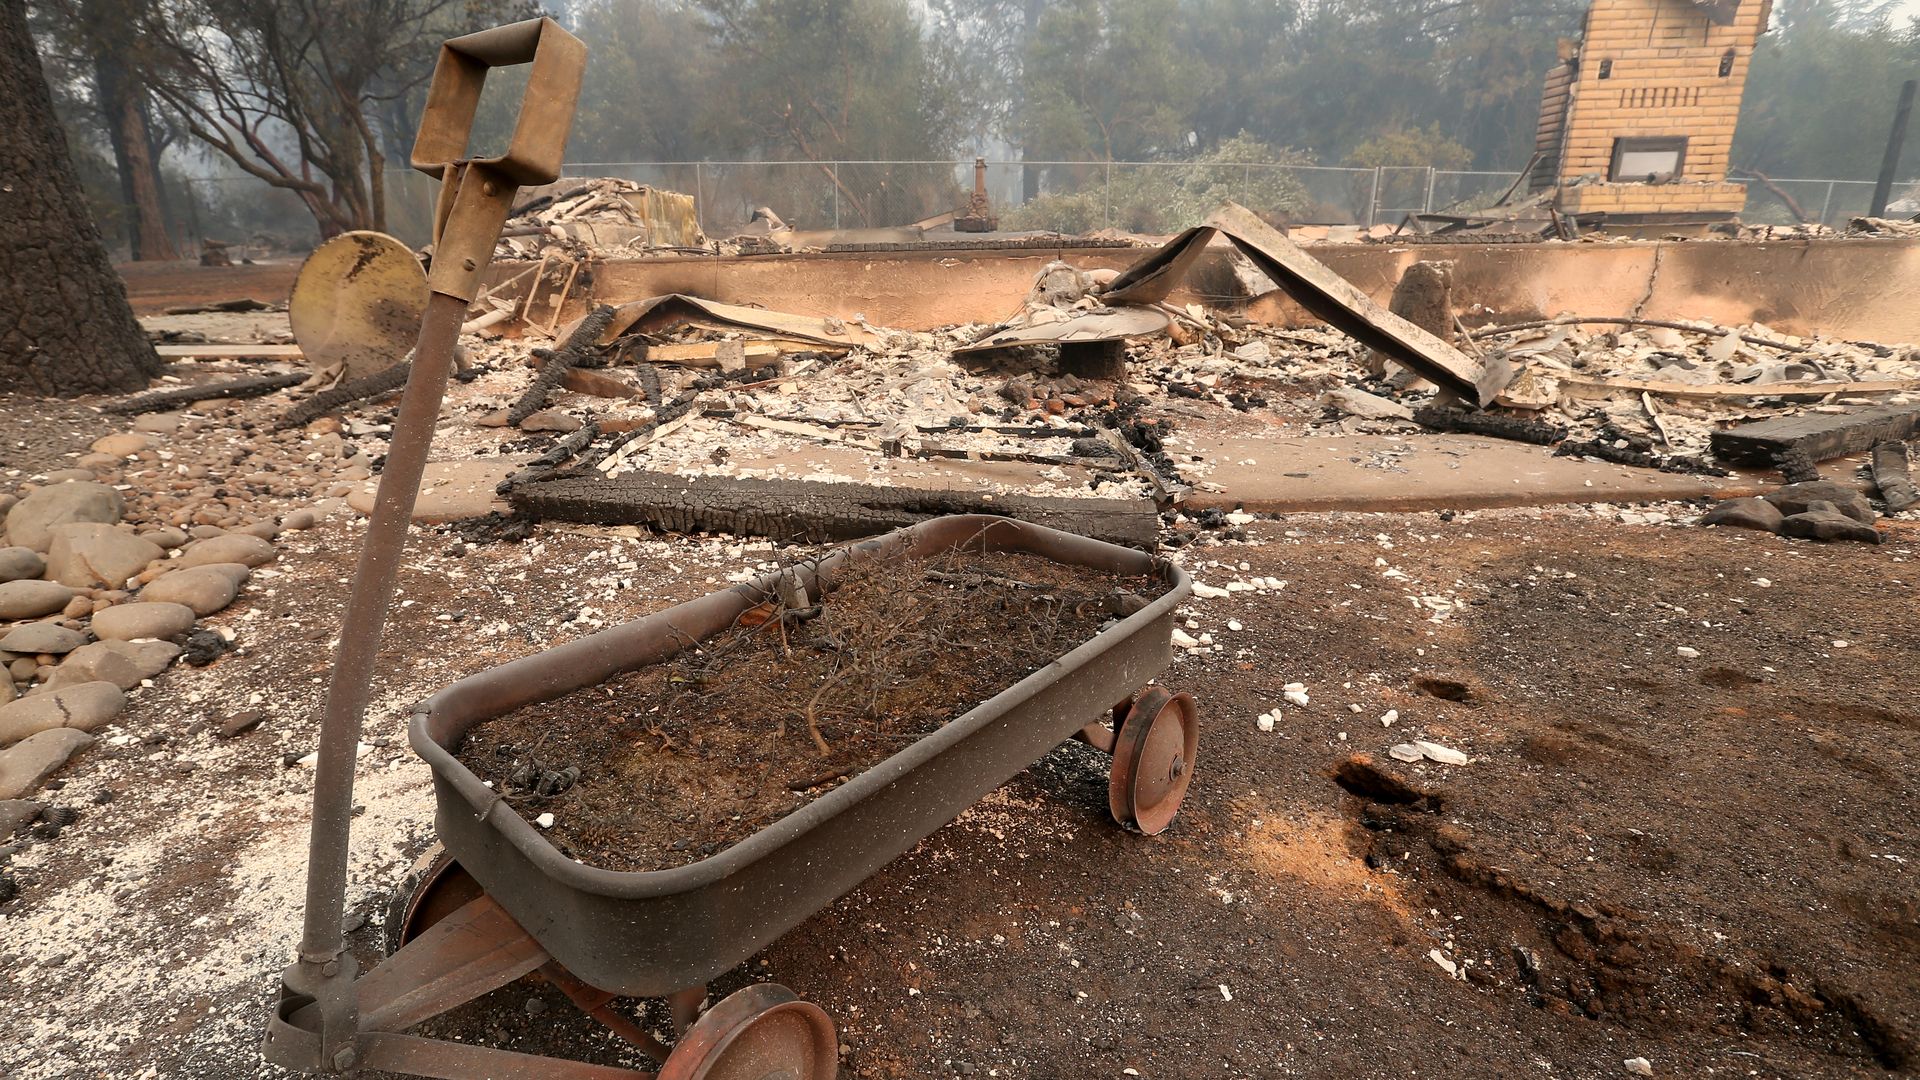 The remains of a house destroyed by the fire in Paradise, California